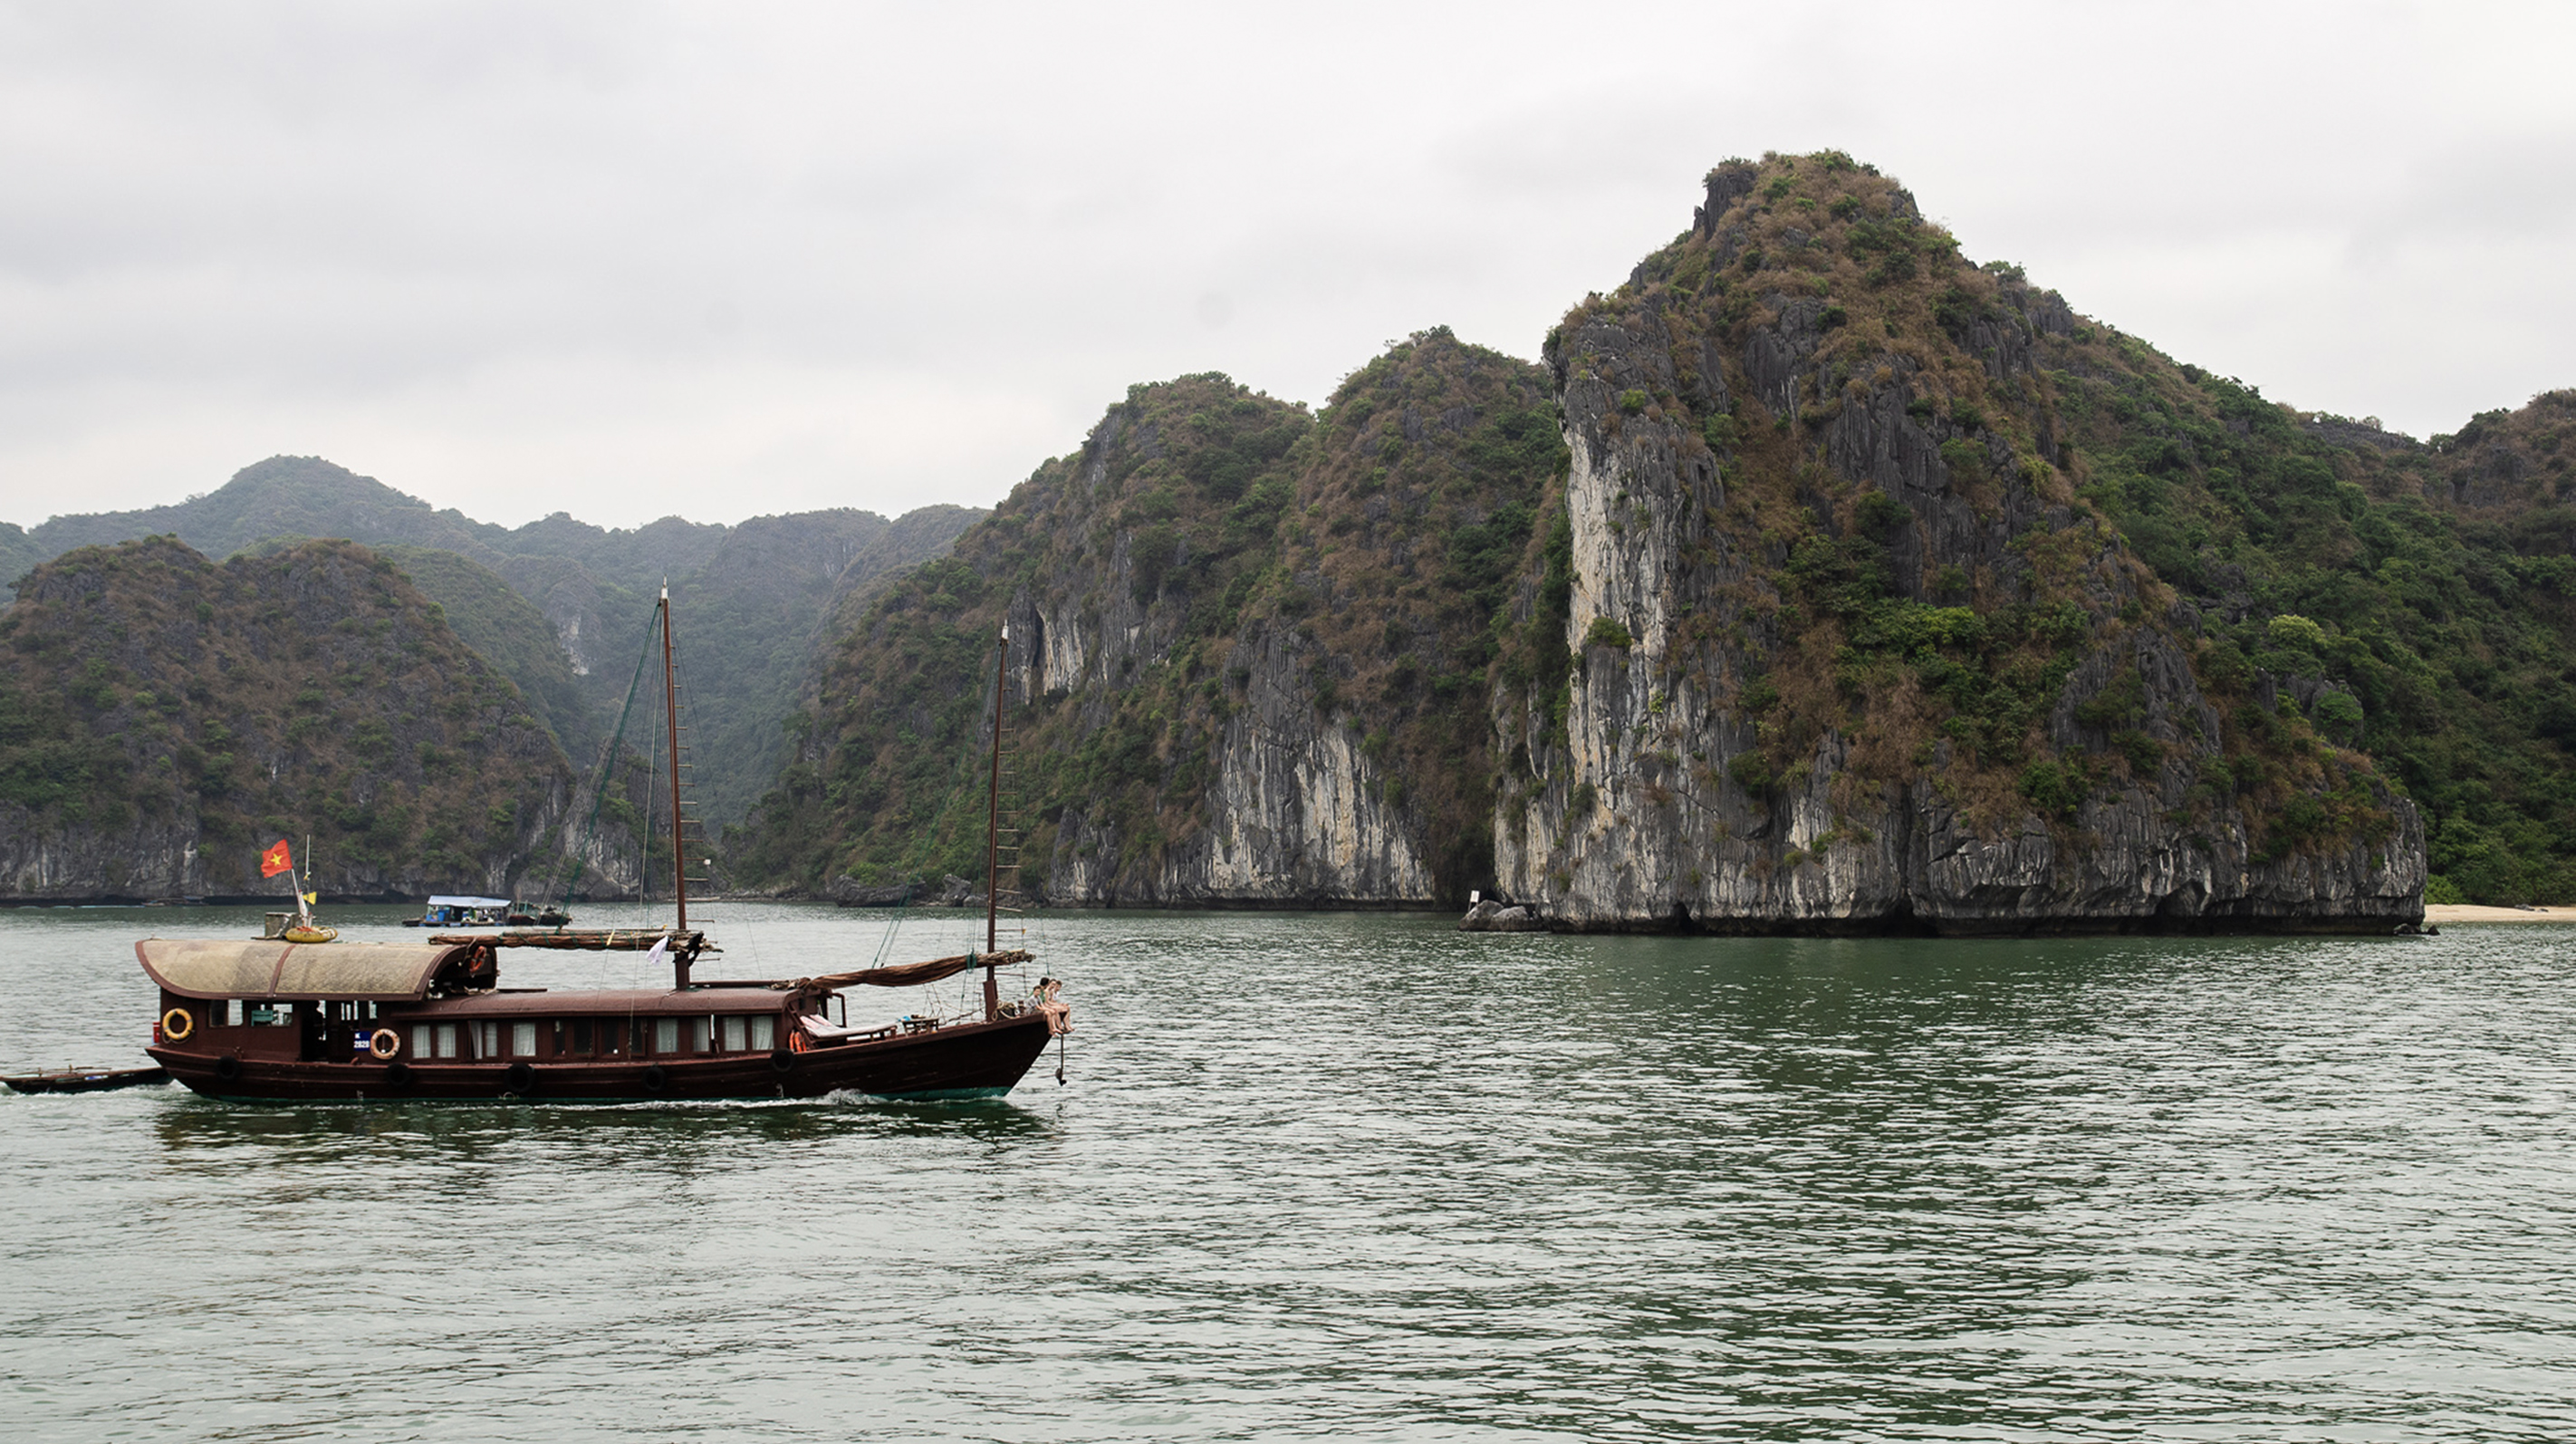 A FAMILY TRIP TO HALONG BAY